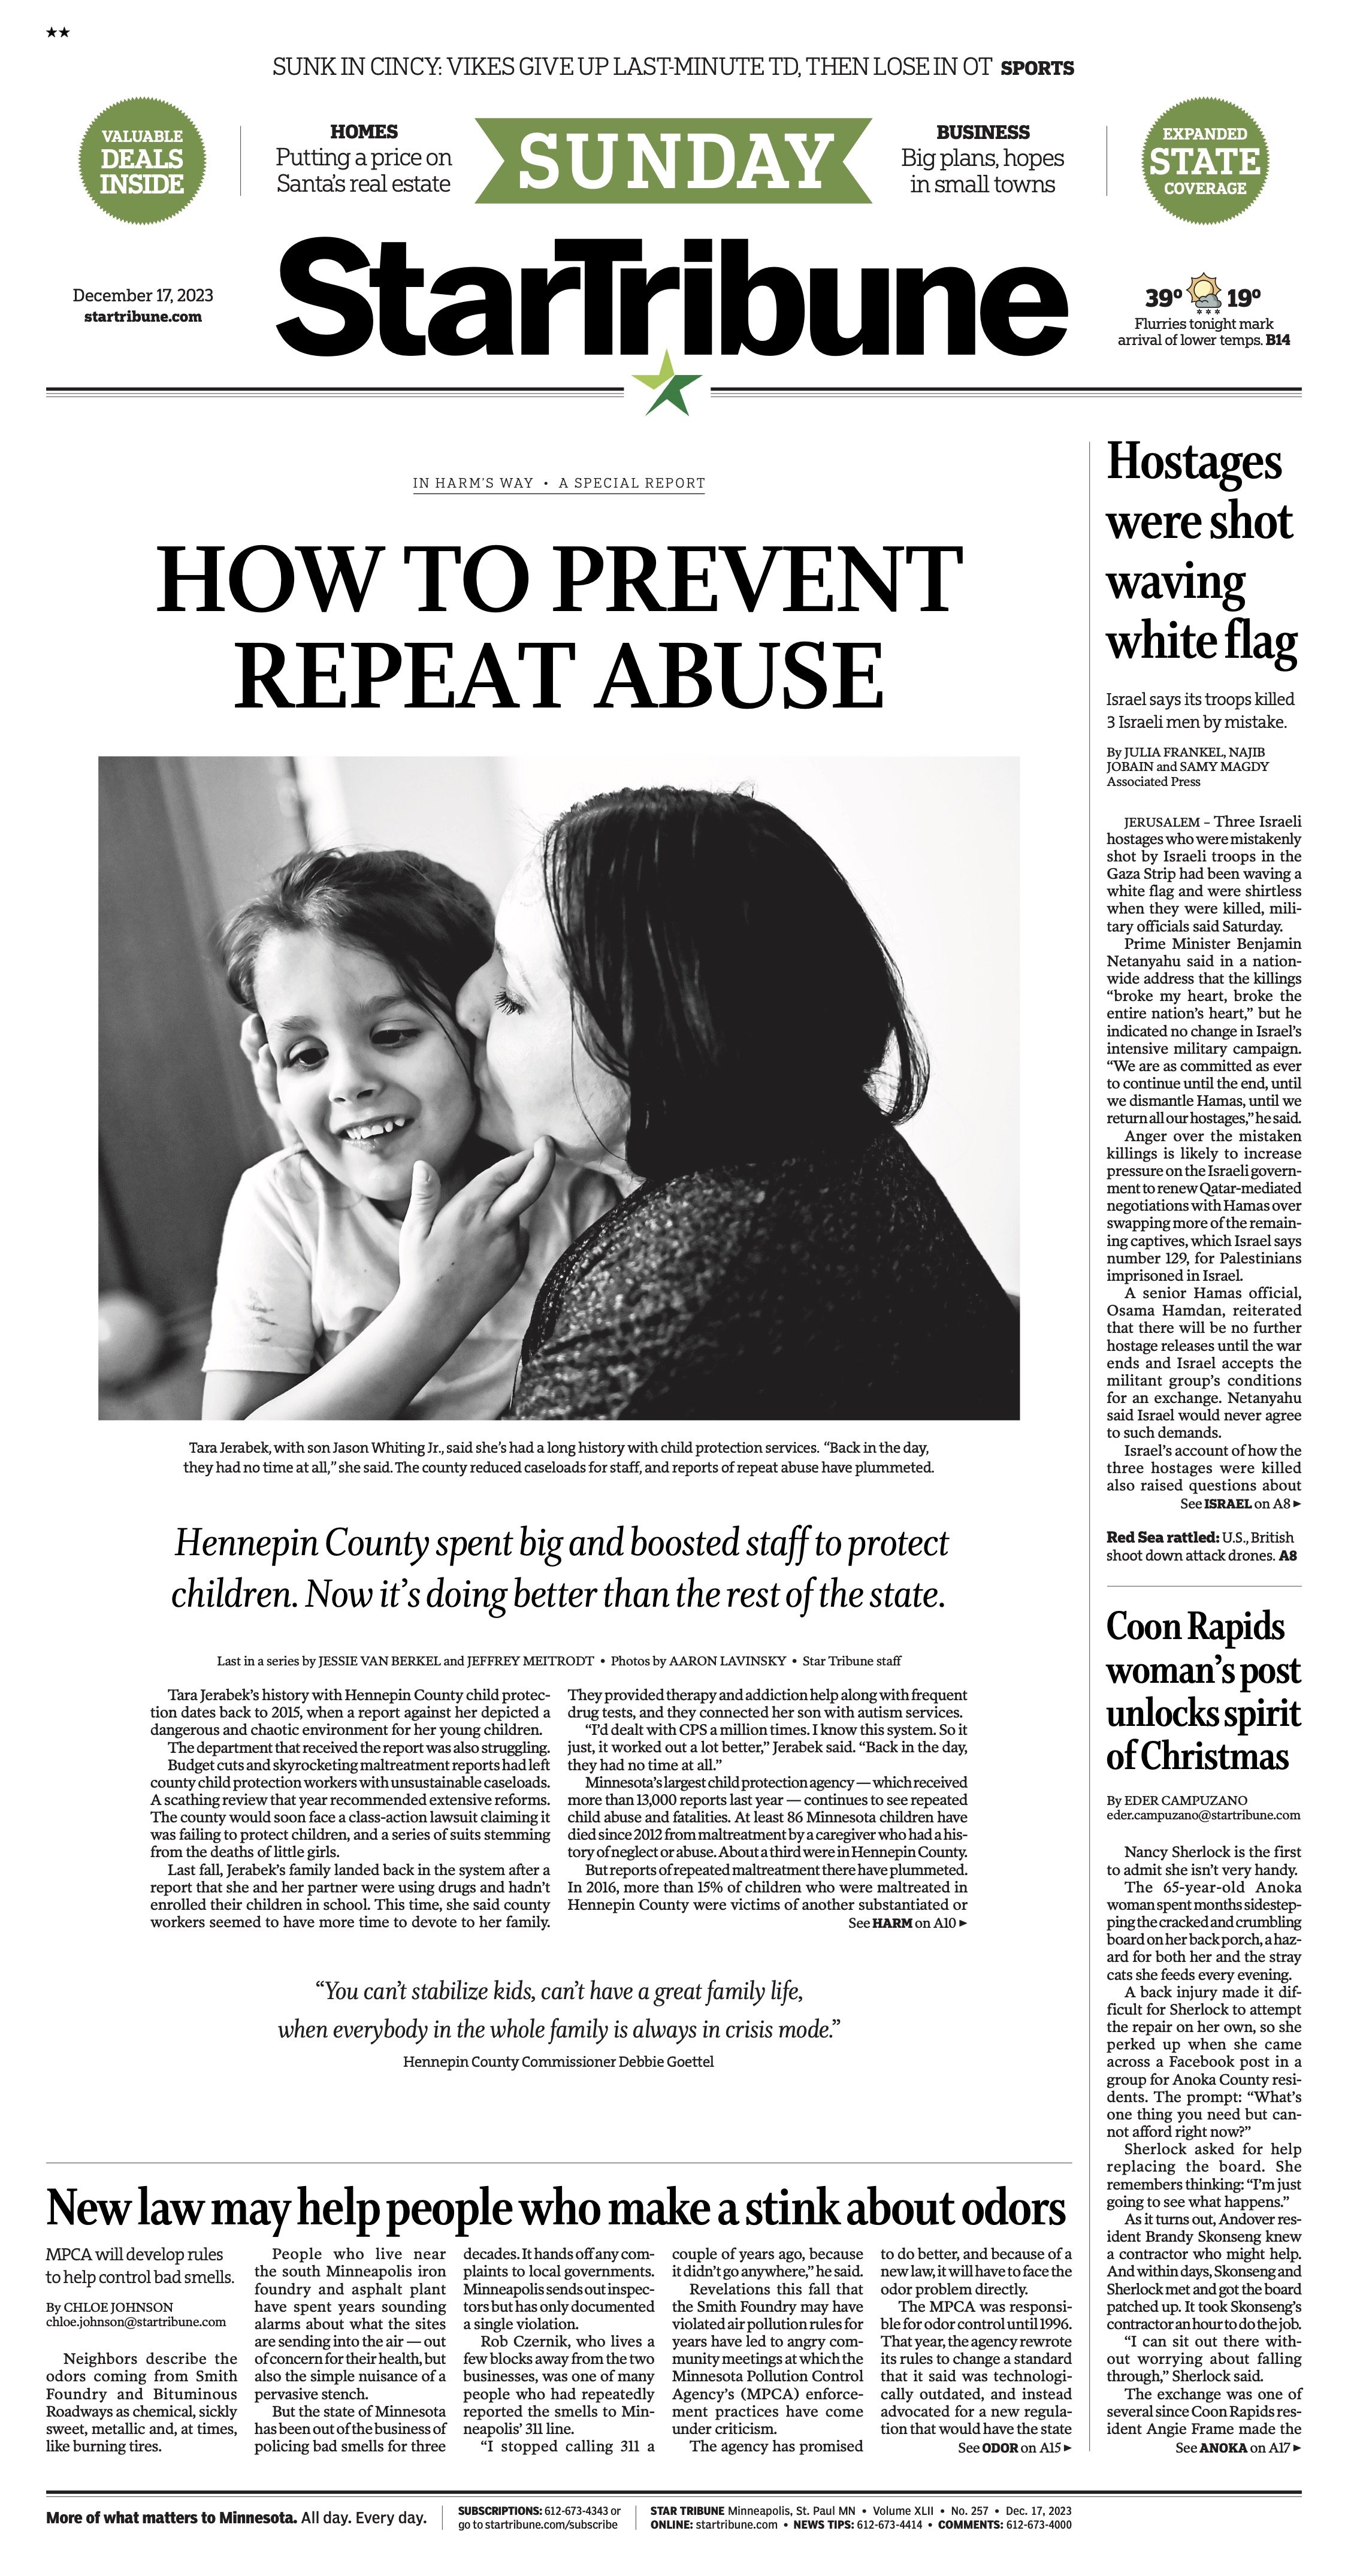    Click here to read this installment of “In Harm’s Way”, a series exploring how Minnesota’s child protection system failed to save some of the state’s most vulnerable residents.   